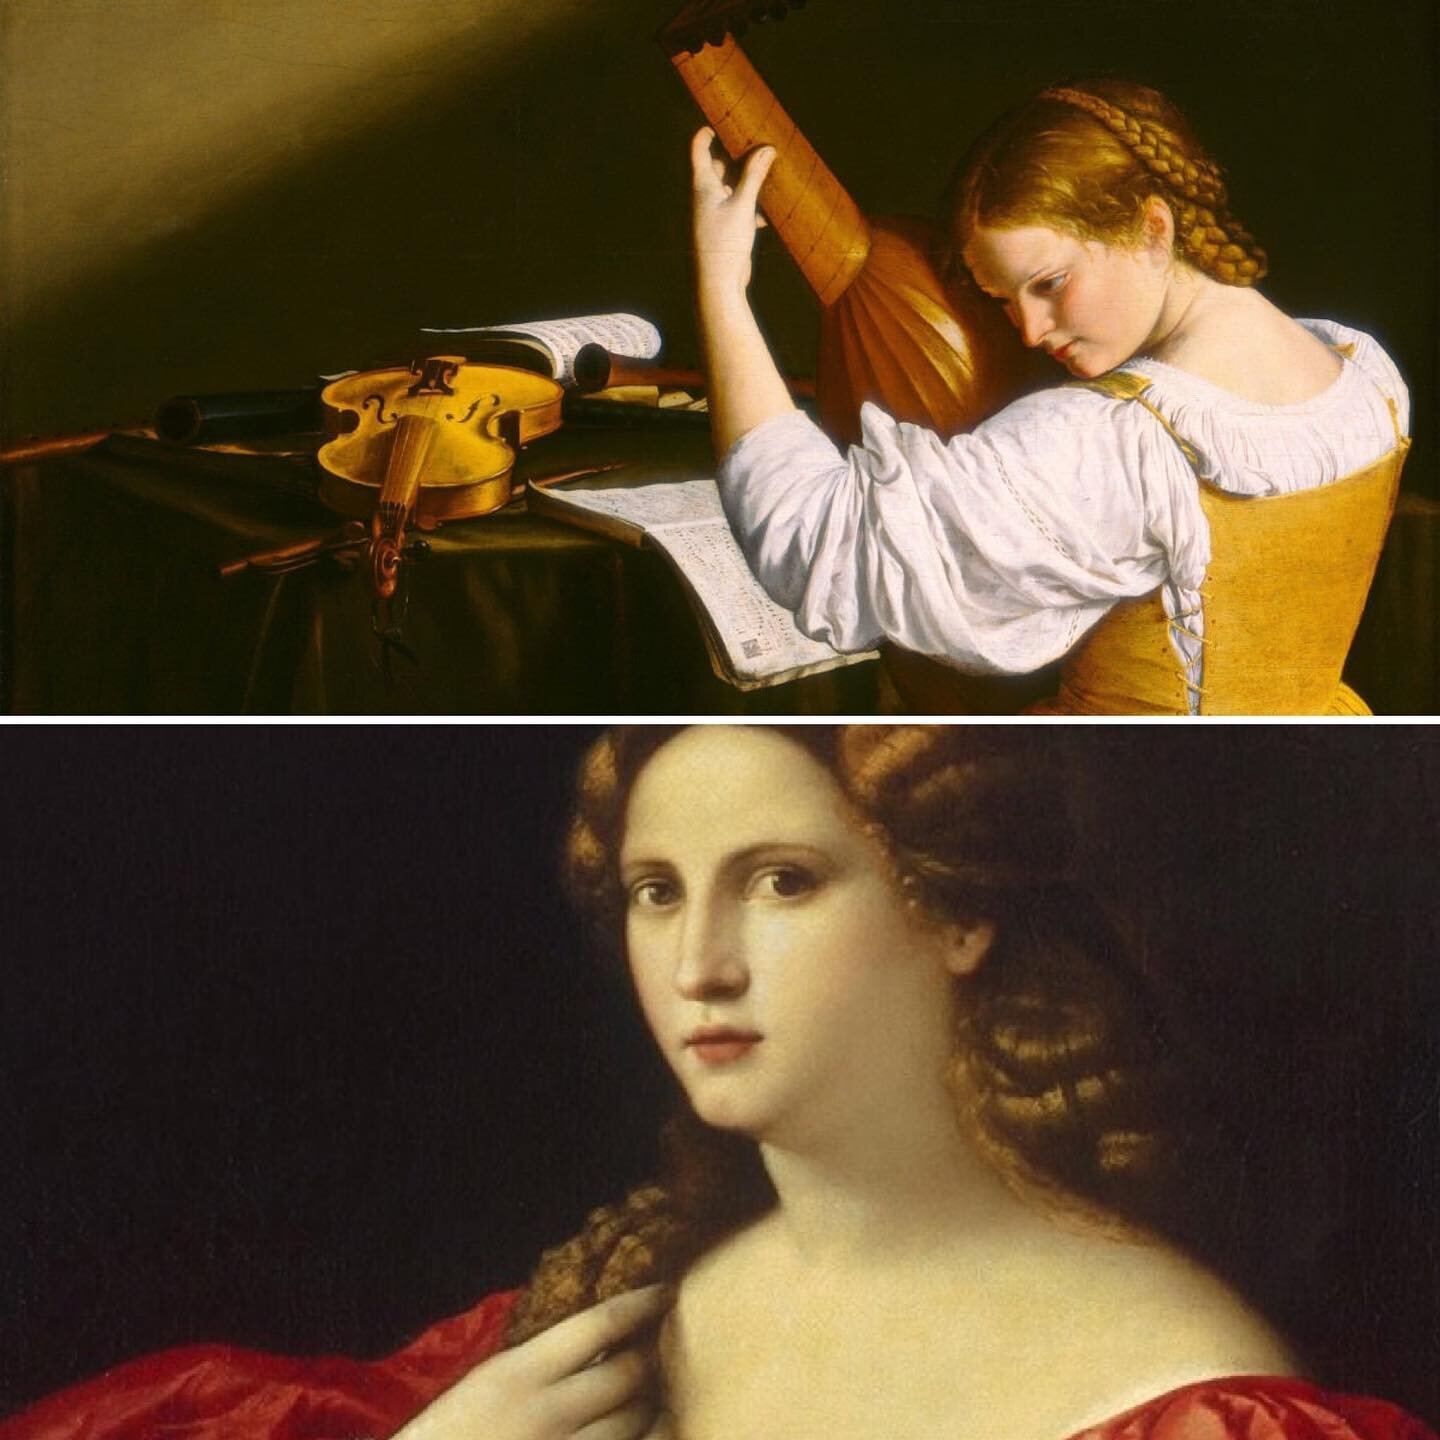 This year on #nationalsiblingday we&rsquo;re celebrating Francesca and Settimia Caccini! Both sisters performed and composed at the Medici court in Florence, achieving fame and success beyond what most women of the time could attain. Settimia went on